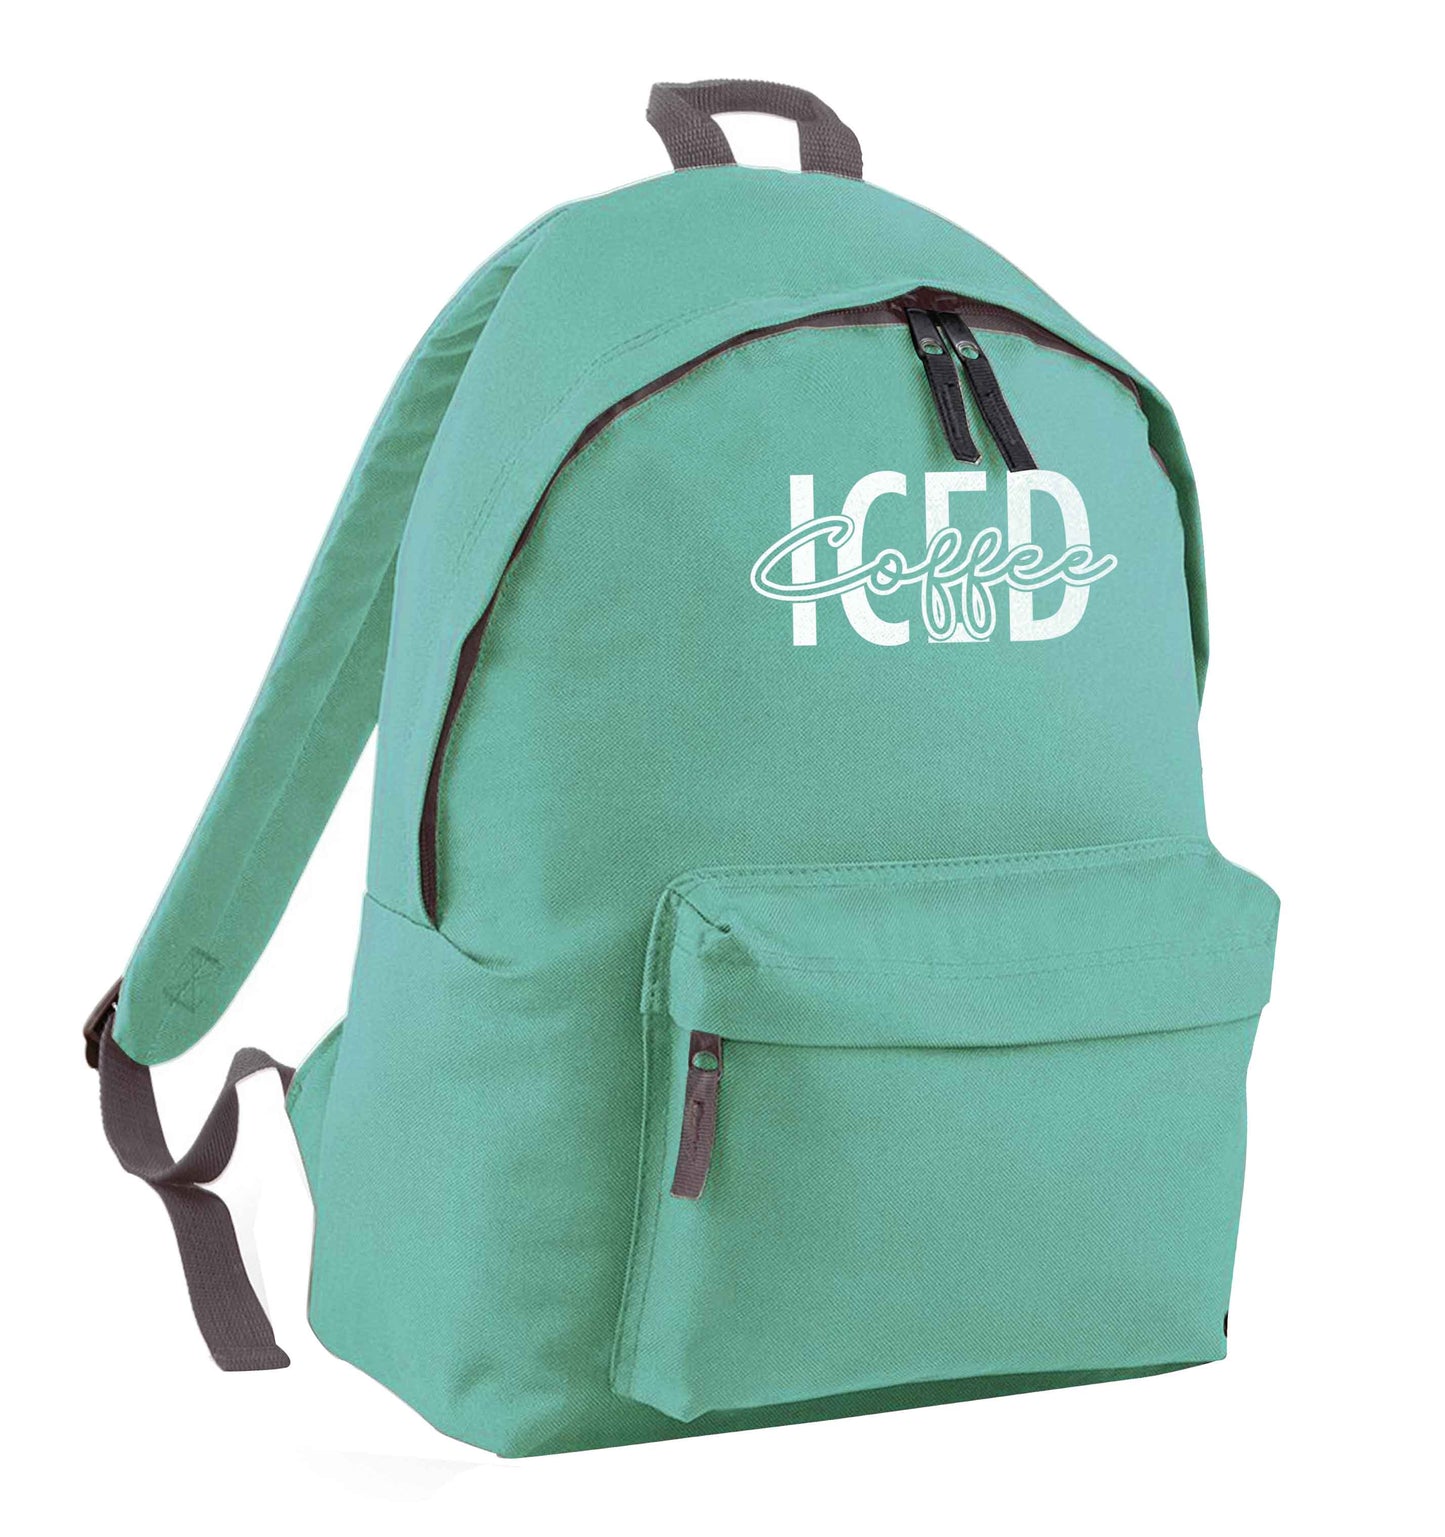 Iced Coffee mint adults backpack